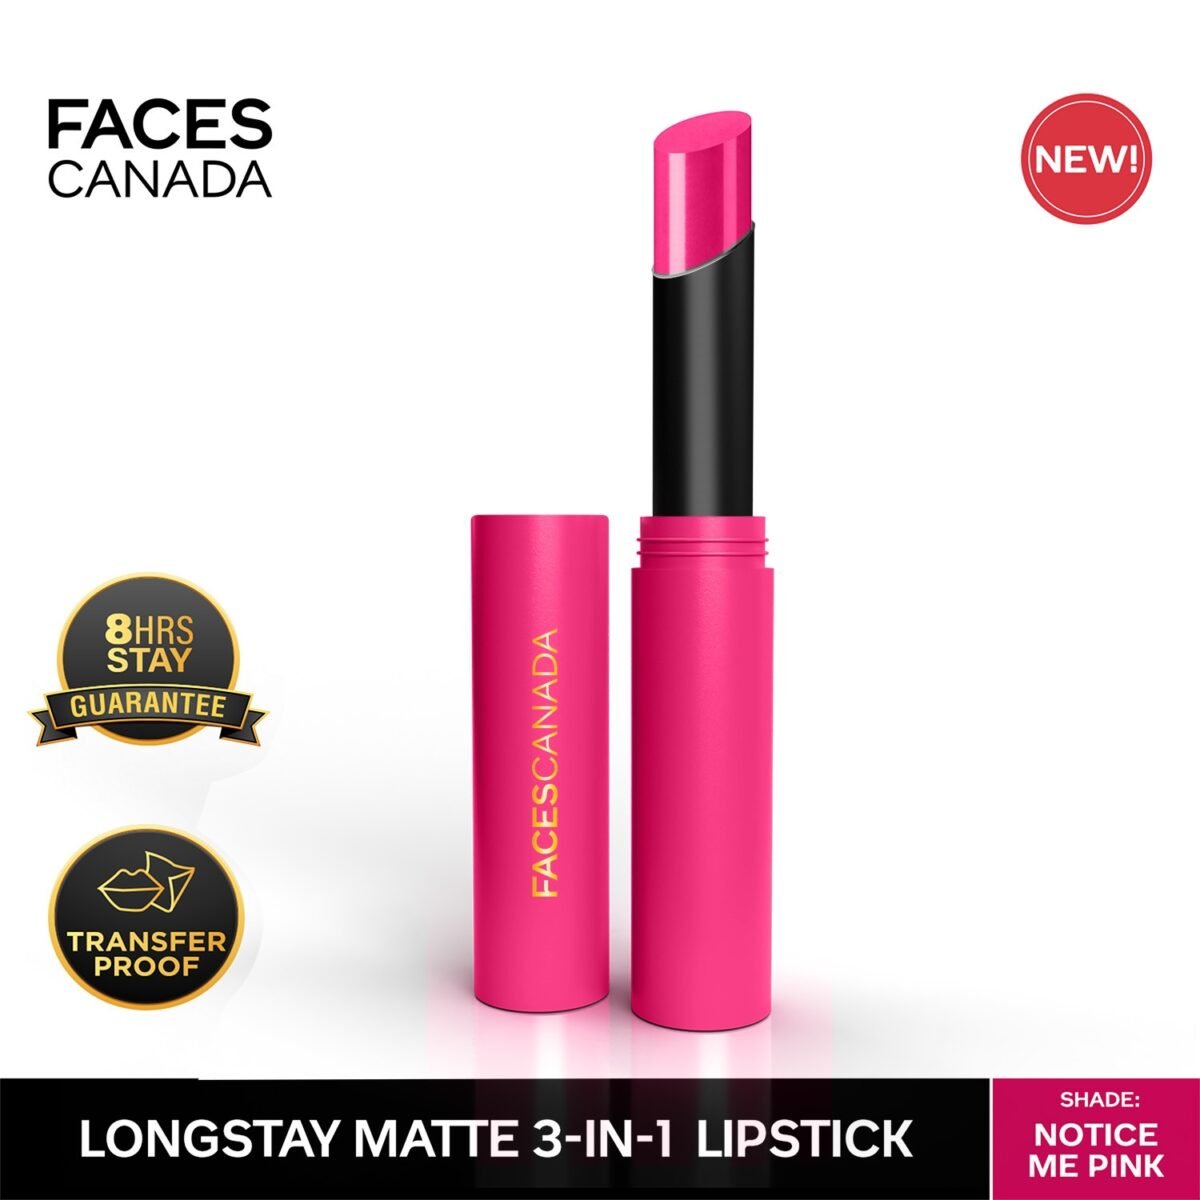 Faces Canada Long Stay Matte Lipstick, 06 Notice Me Pink 2g